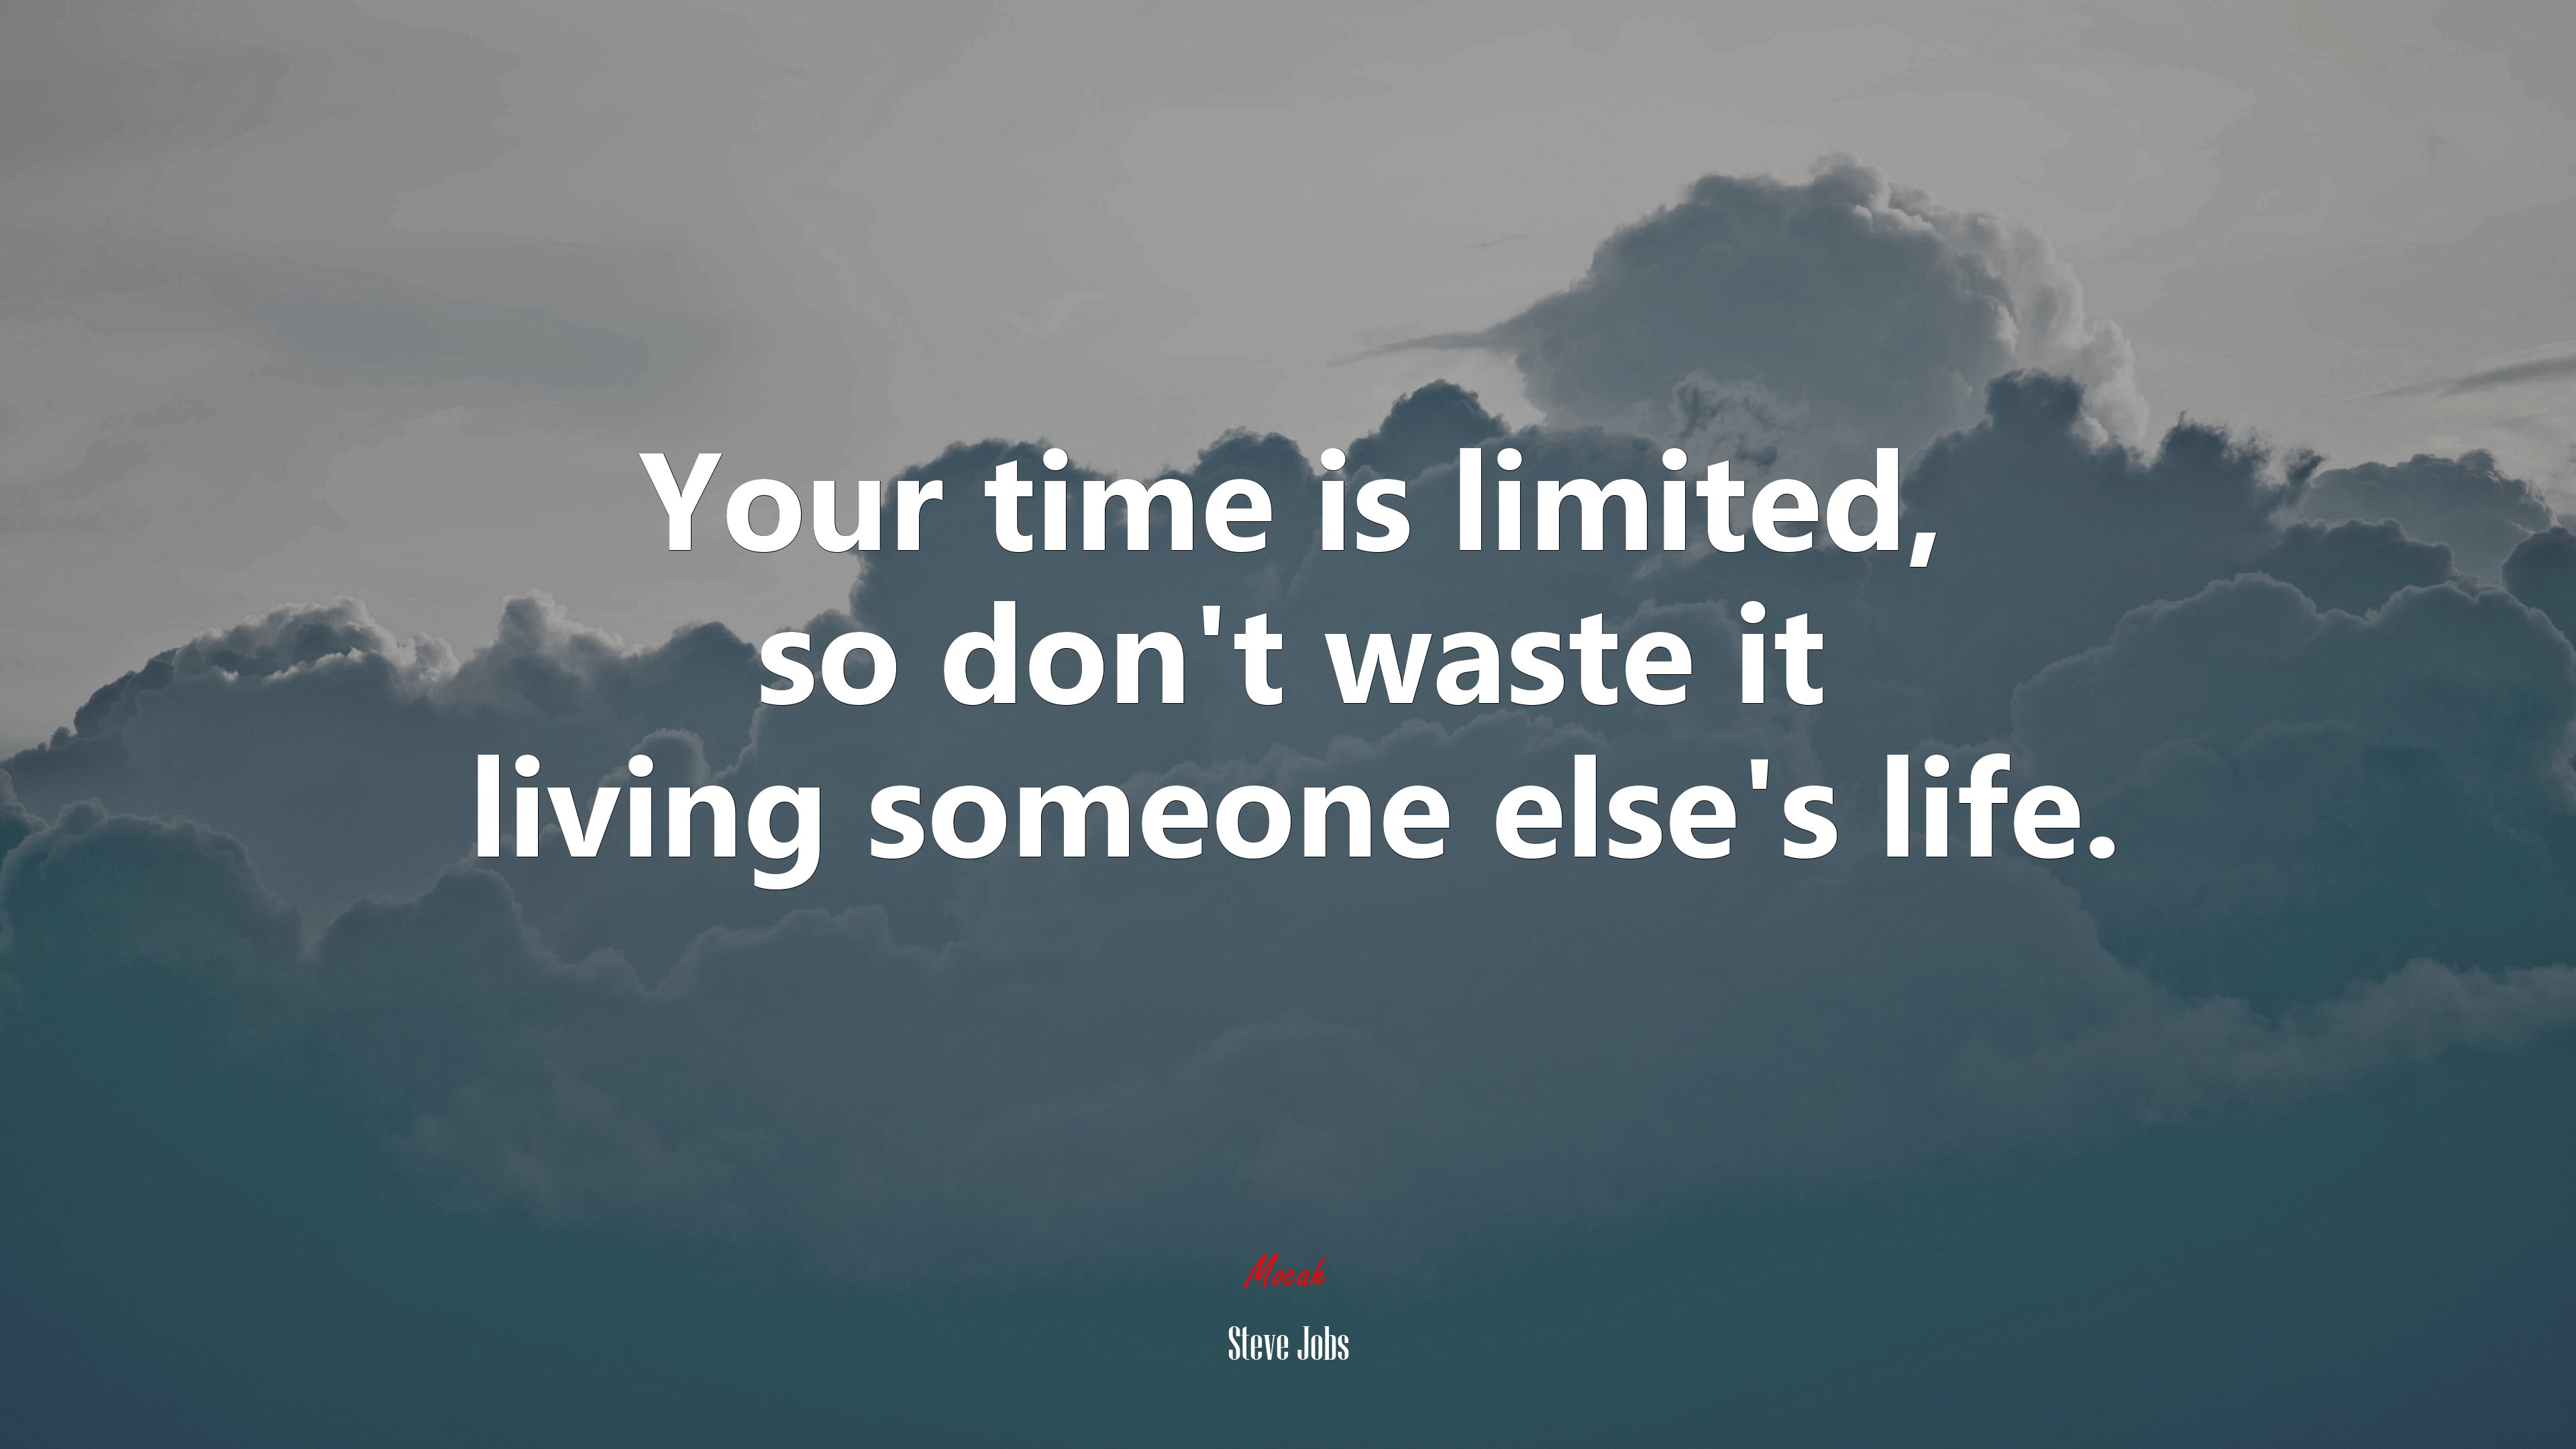 Your time is limited, so don't waste it living someone else's life. Steve Jobs quote Gallery HD Wallpaper